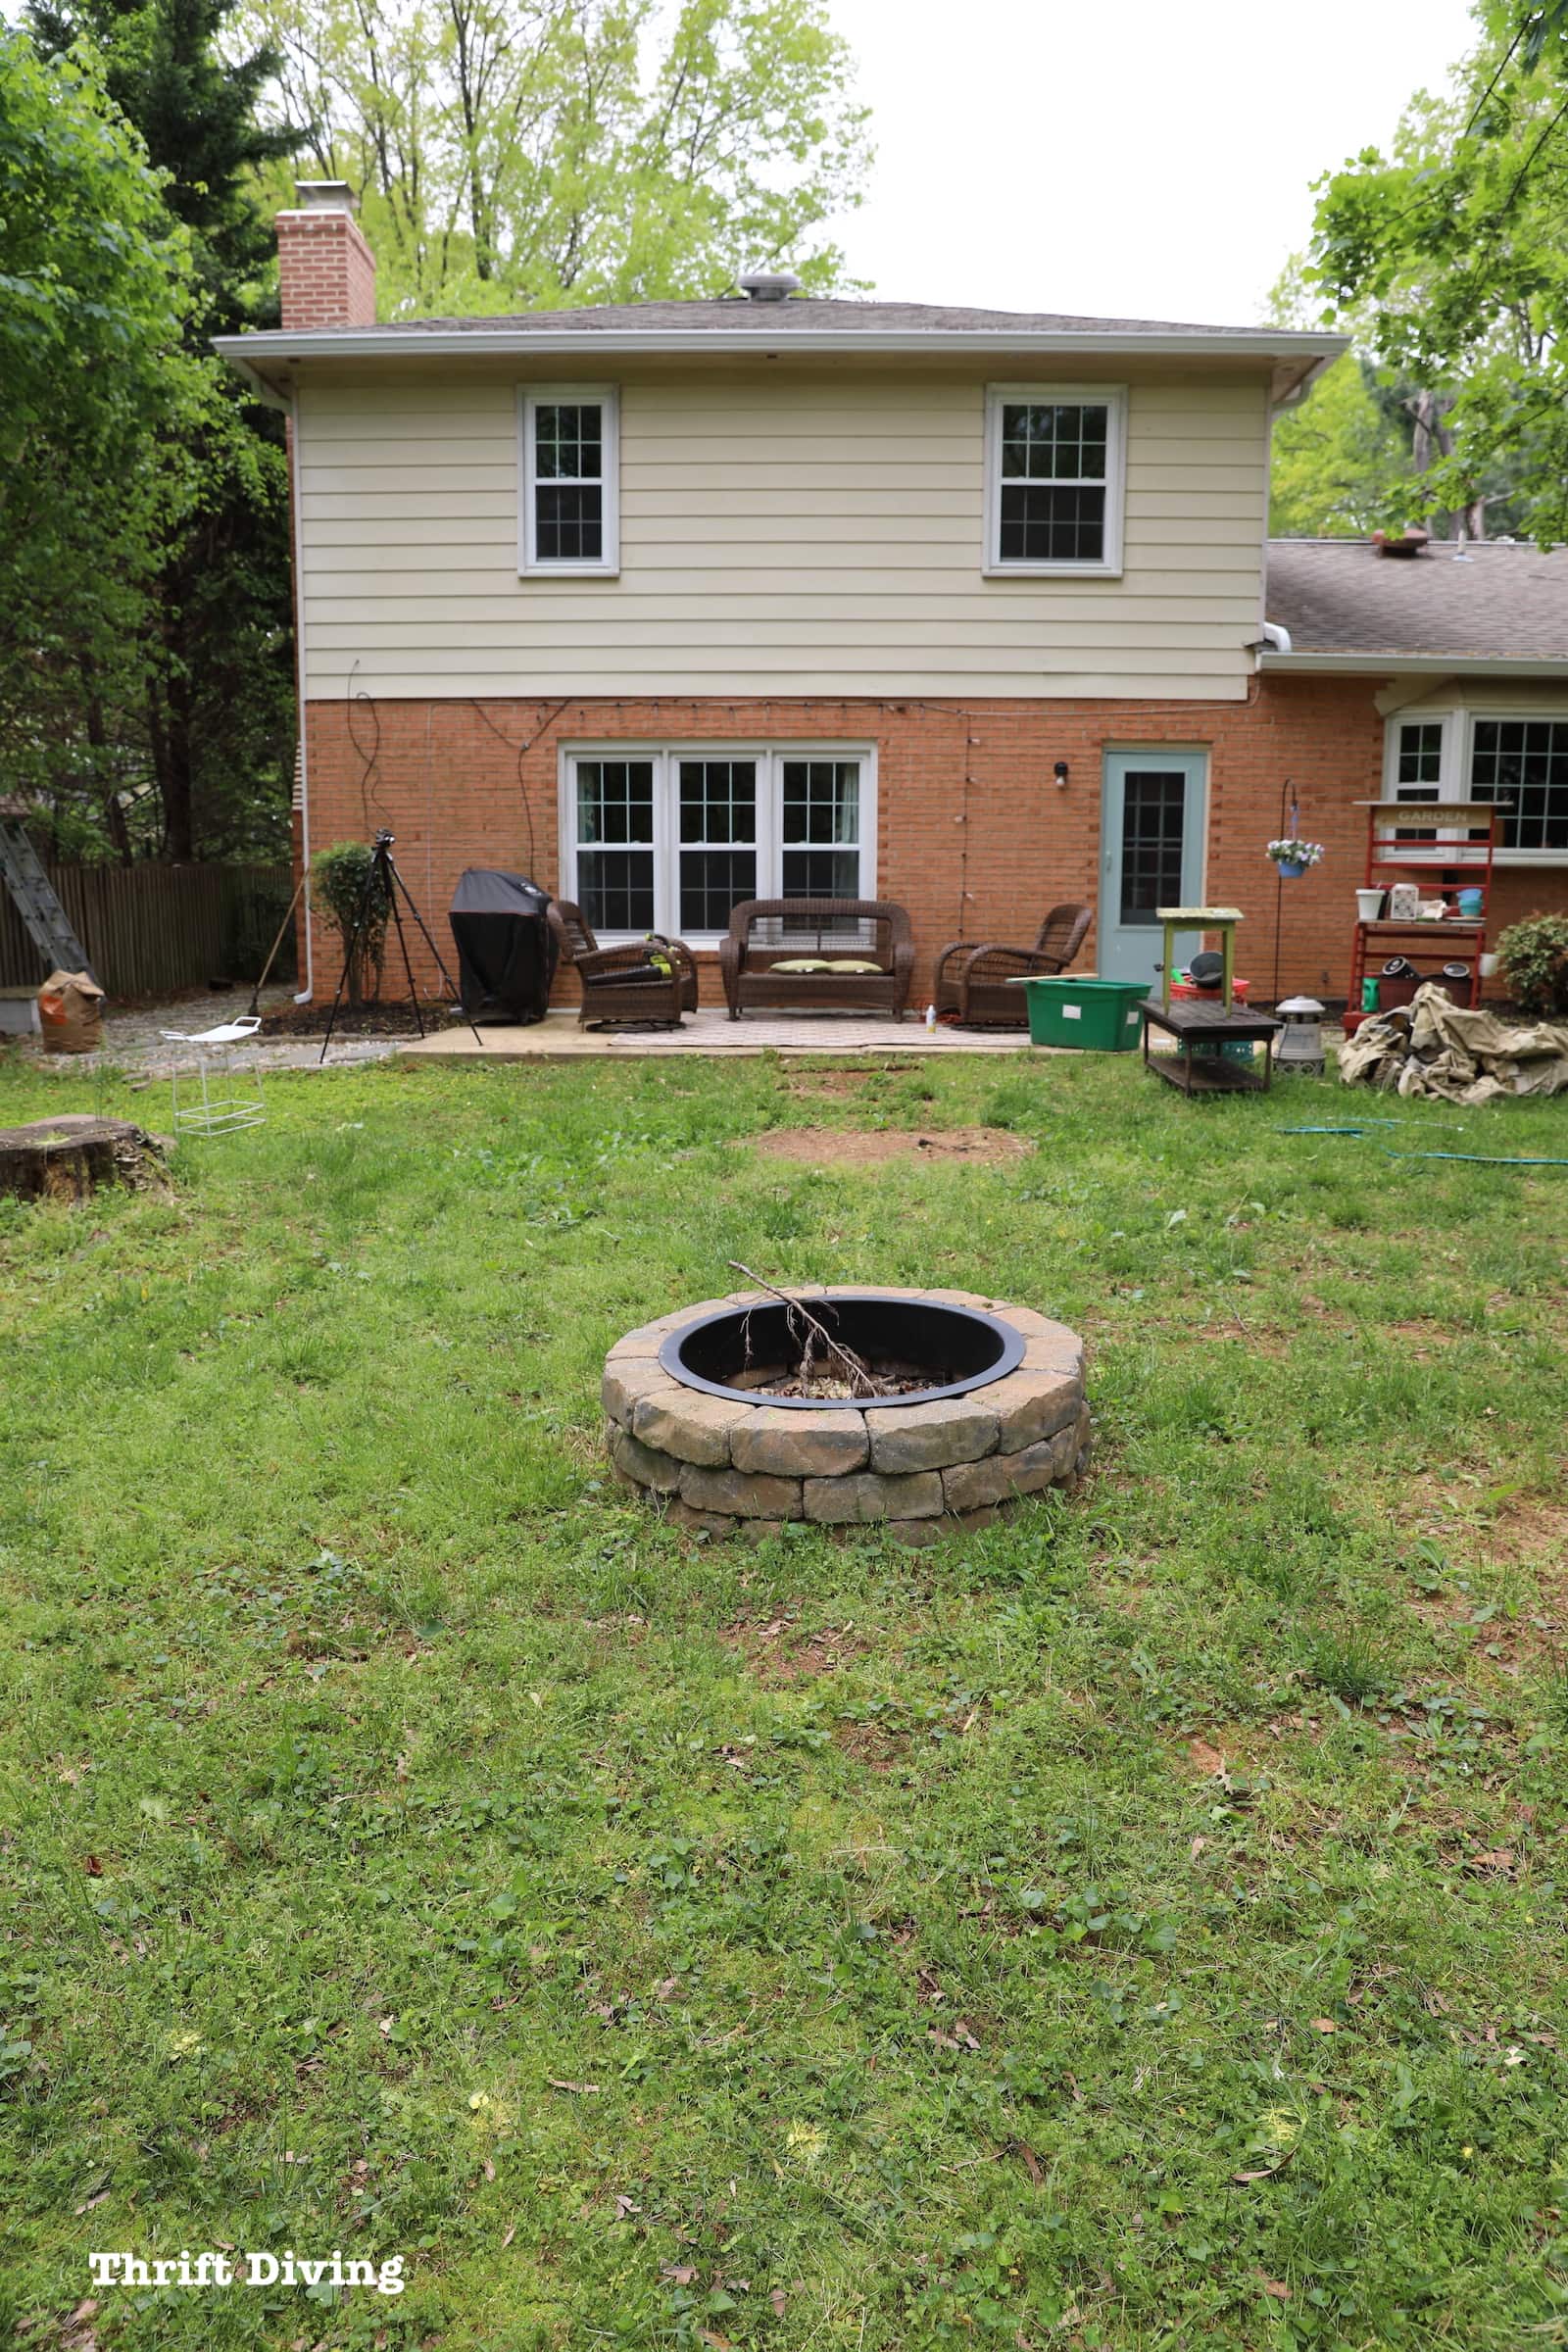 Outdoor Makeover - Creating a DIY Outdoor Makeover - The backyard was boring. - Thrift Diving